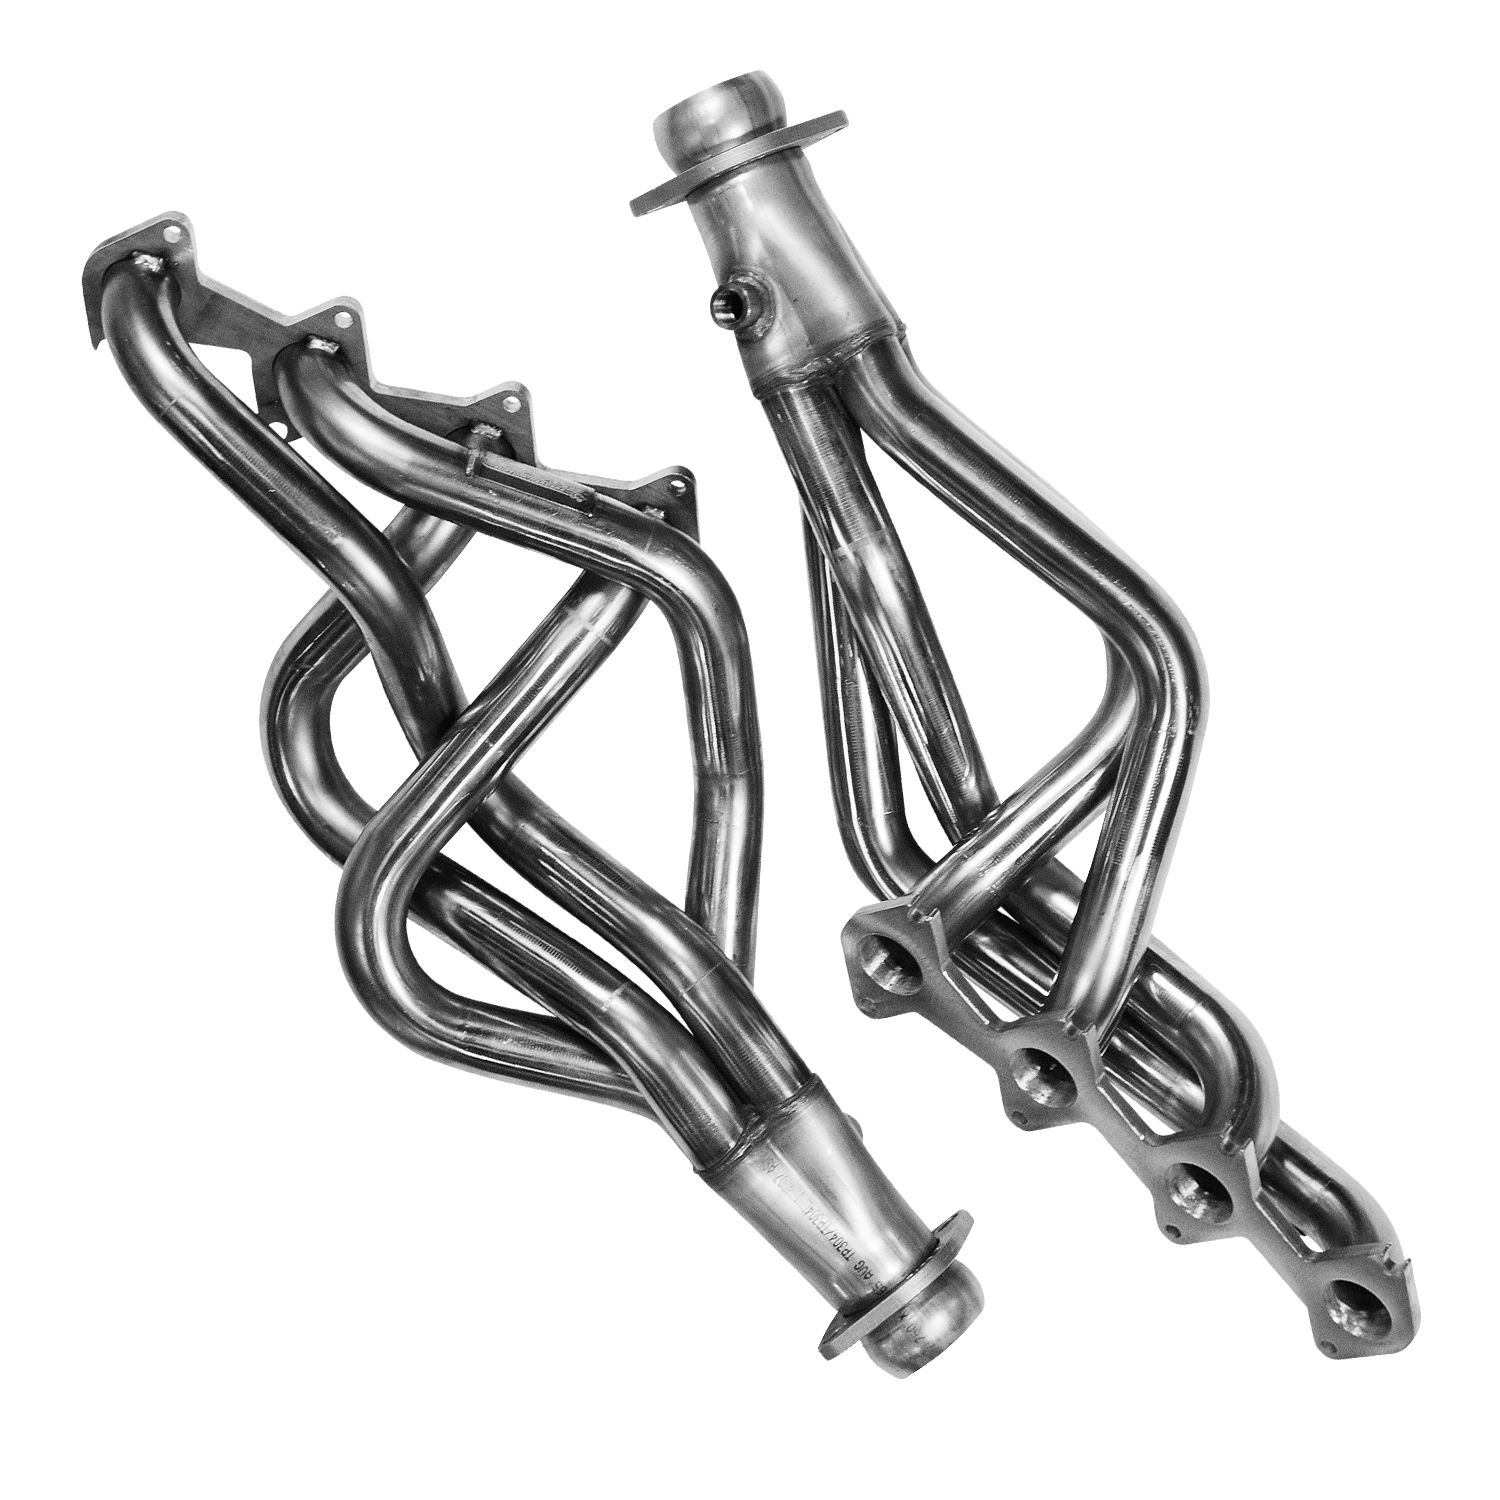 Stainless Steel Headers 1.625 x 2.5" Collector Long Tube Incl. 3-12" O2 Extension Harness